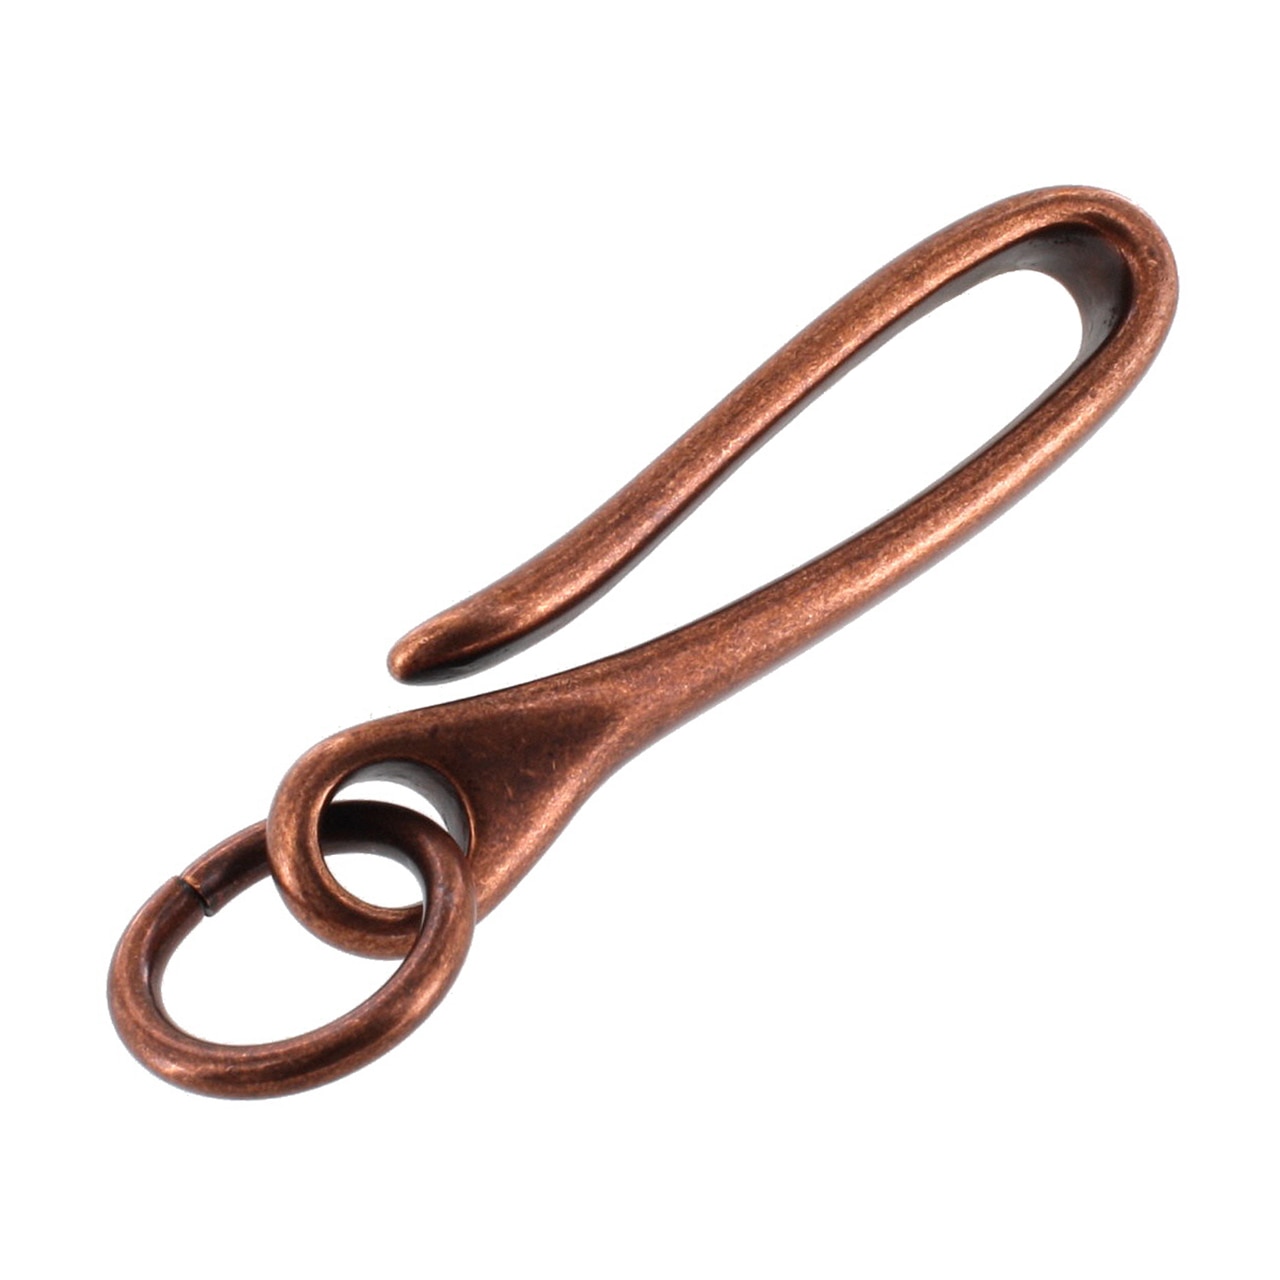 Keyholes- Antique Copper Chain By The Foot